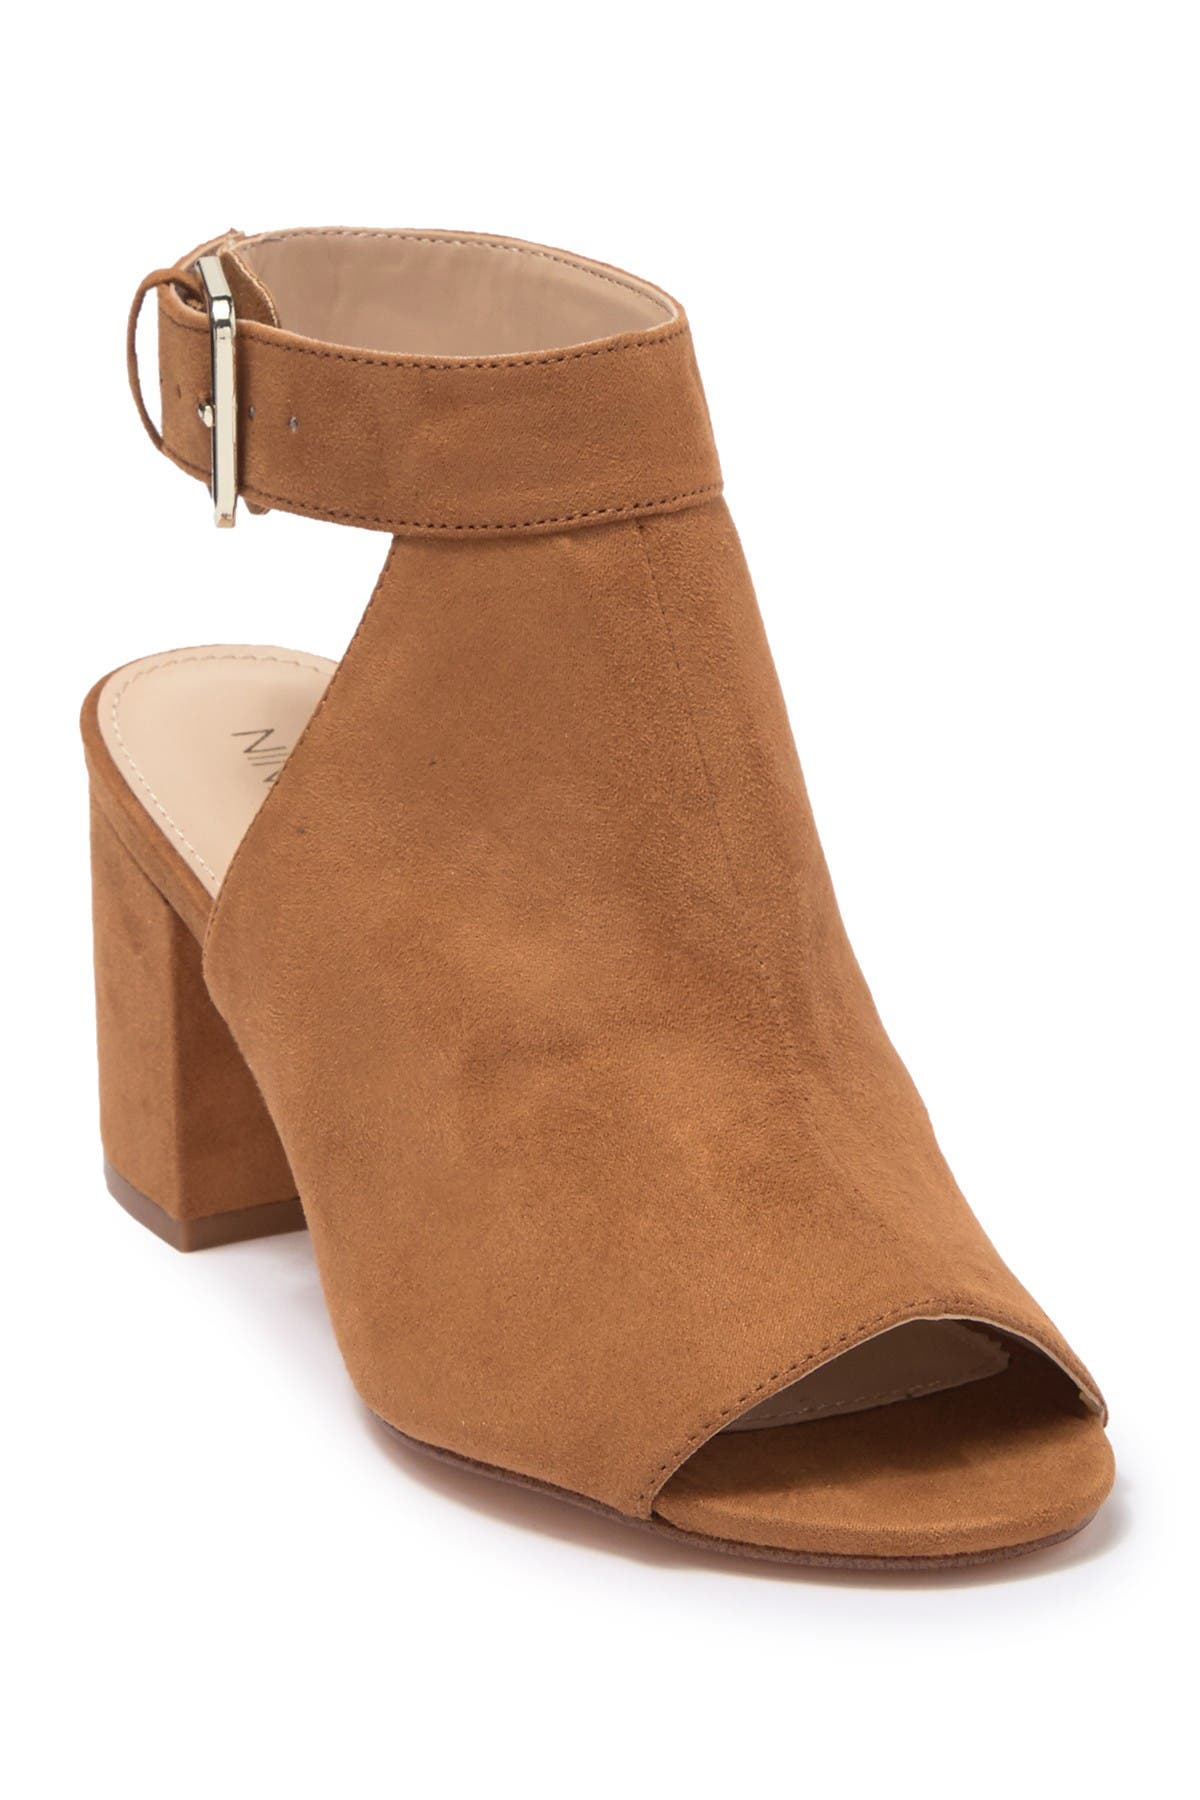 nine west cut out booties